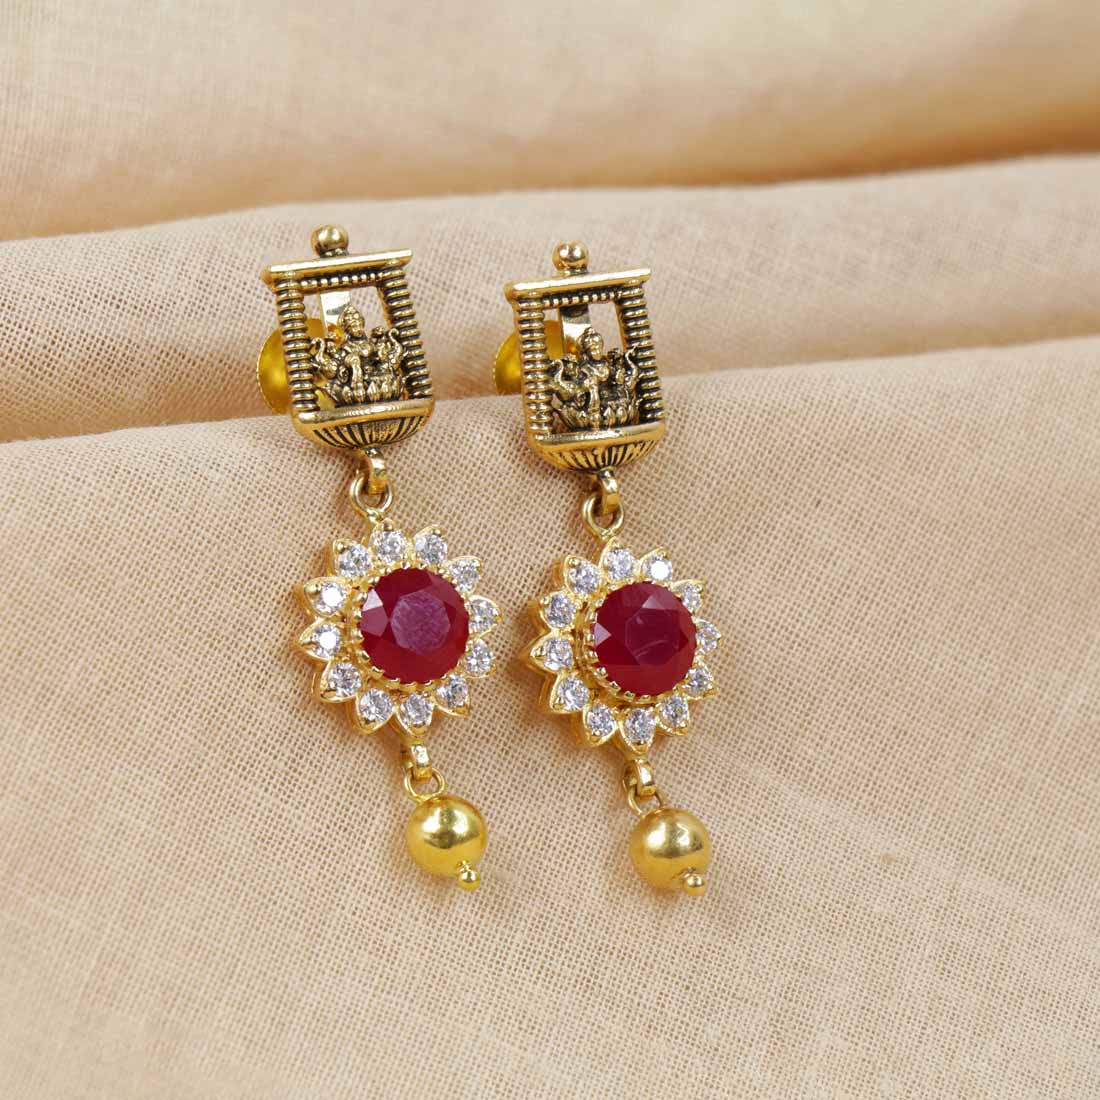 Buy Green Grey White Gold Tone Jhumka Wedding Earrings by JOULES BY RADHIKA  at Ogaan Market Online Shopping Site